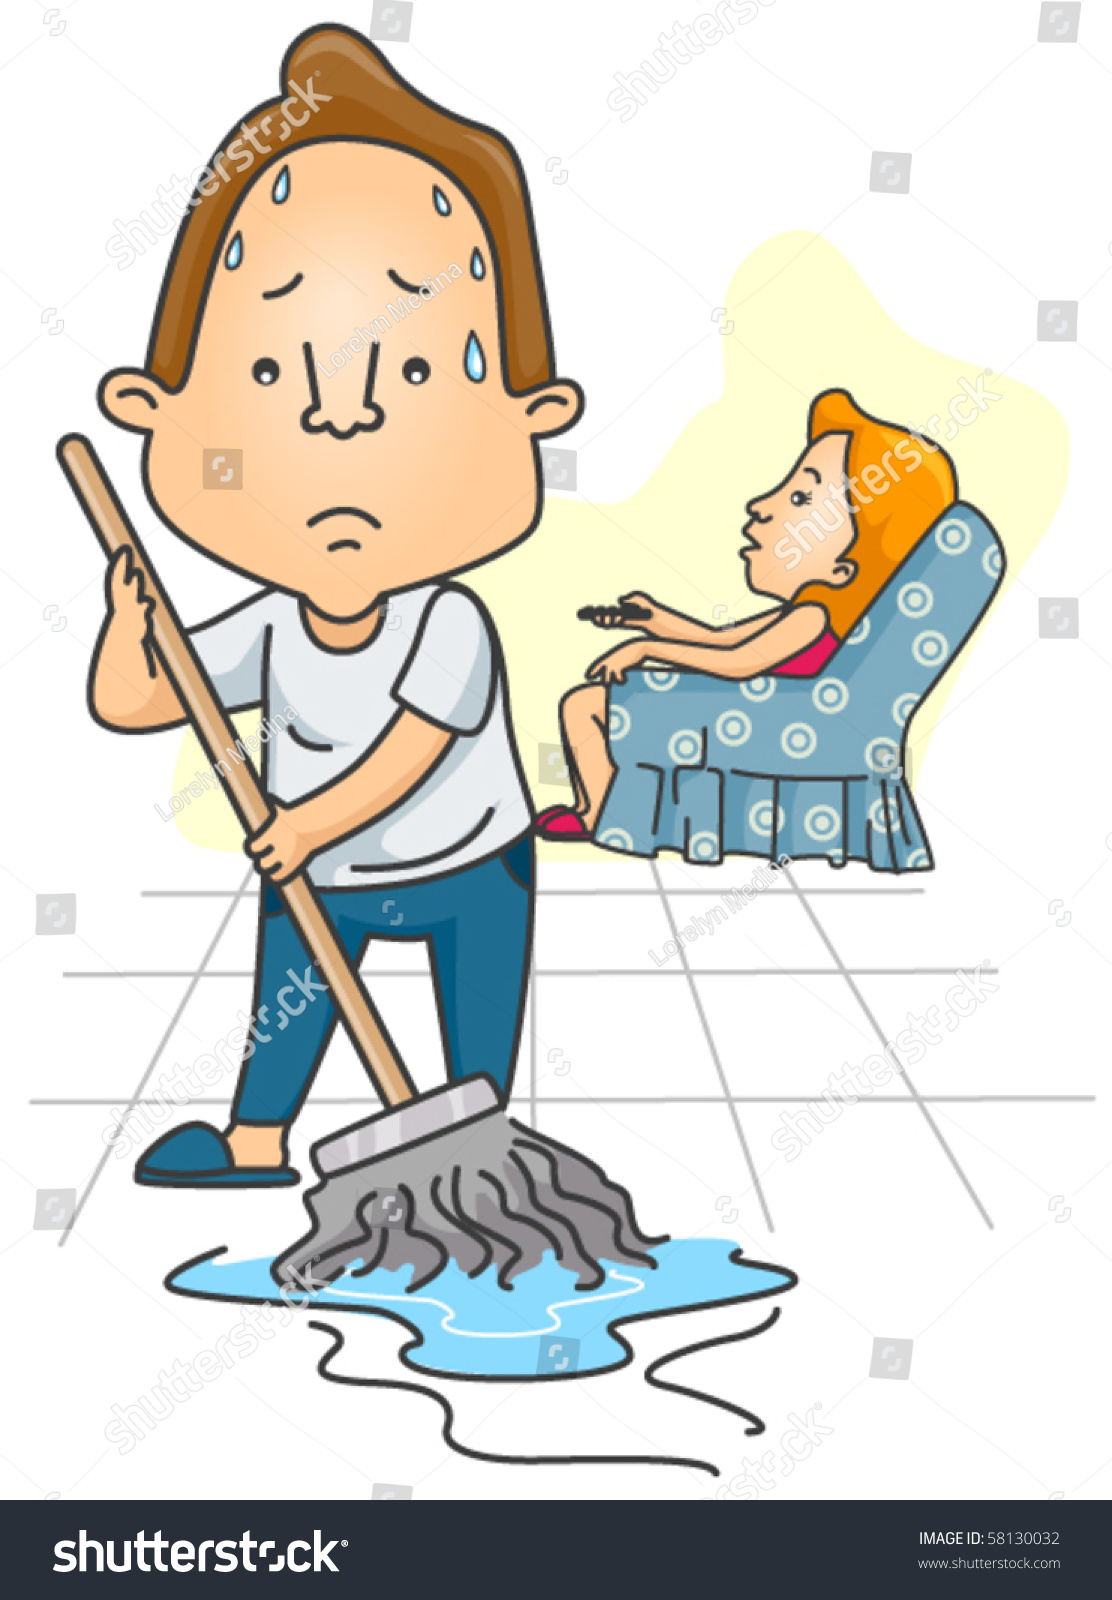 clipart man mopping floor - photo #5